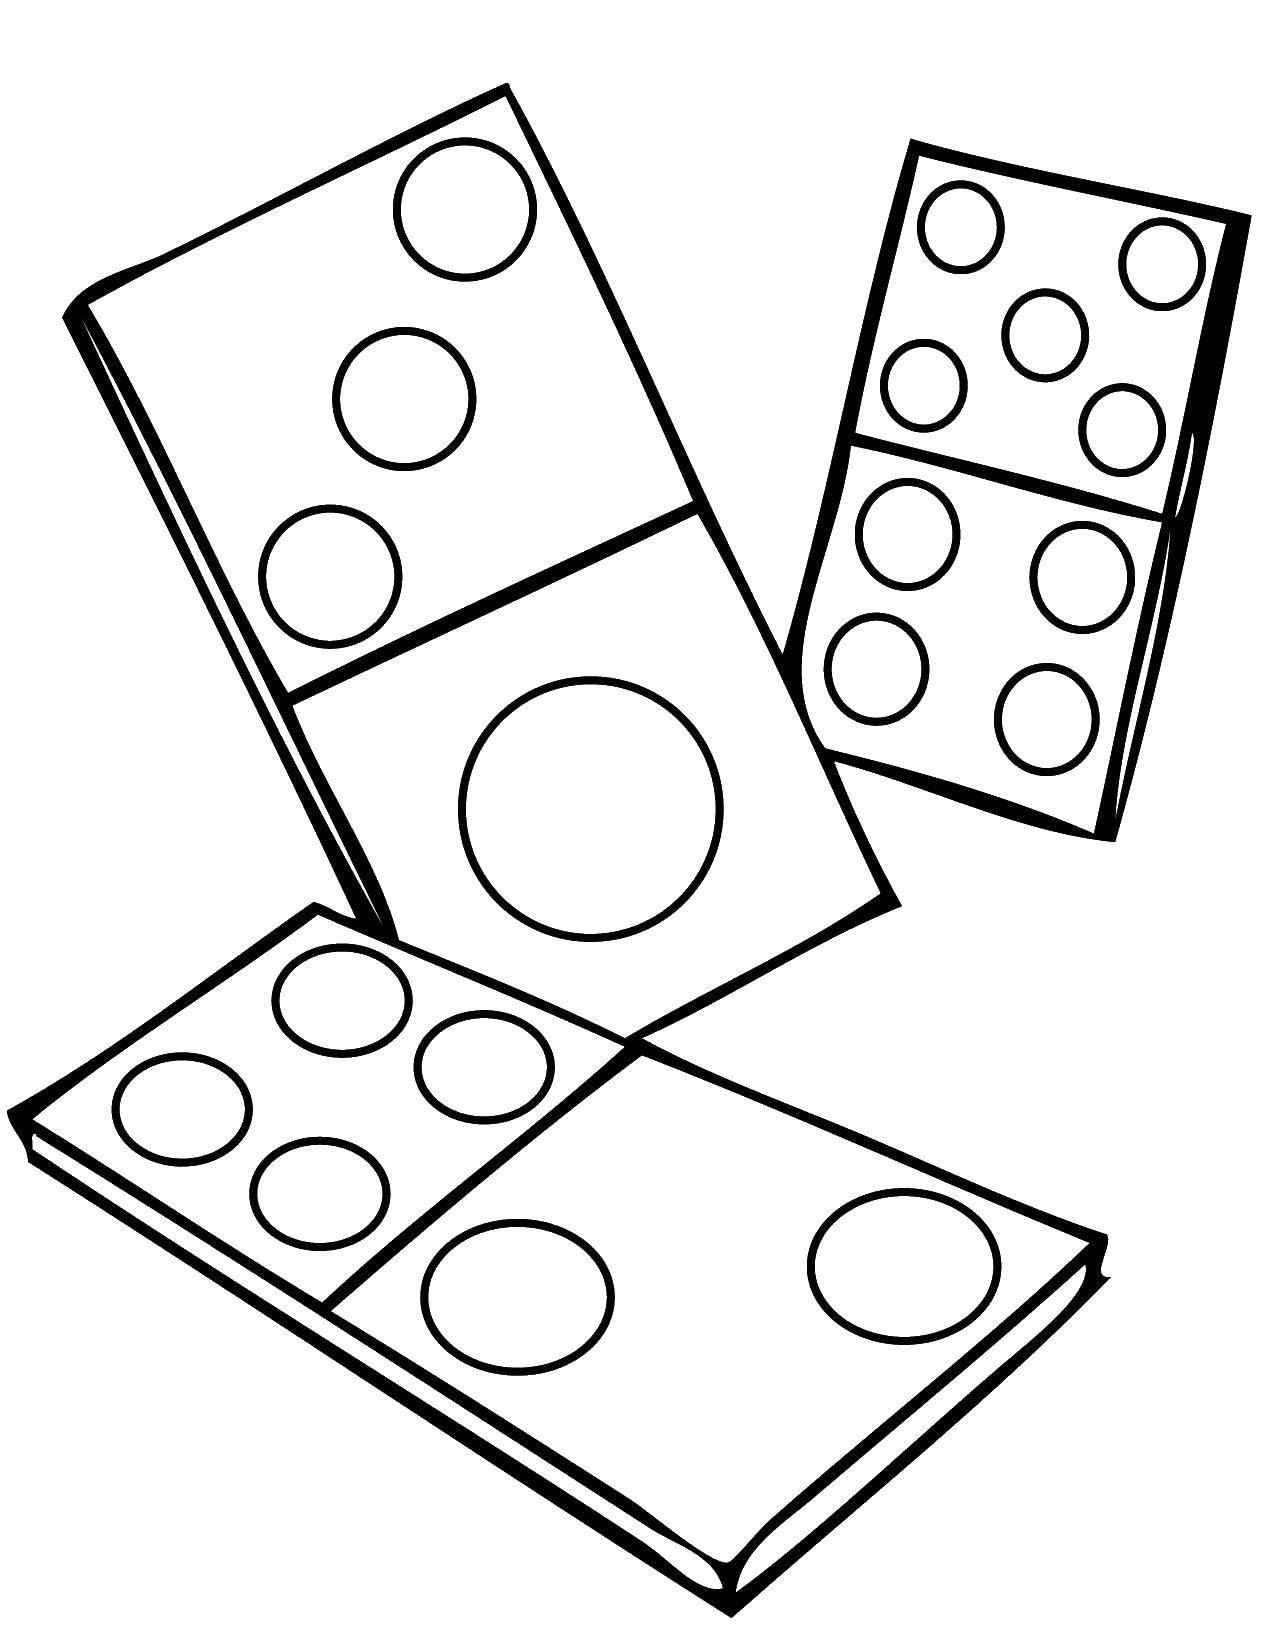 Coloring Domino. Category games. Tags:  dominoes.